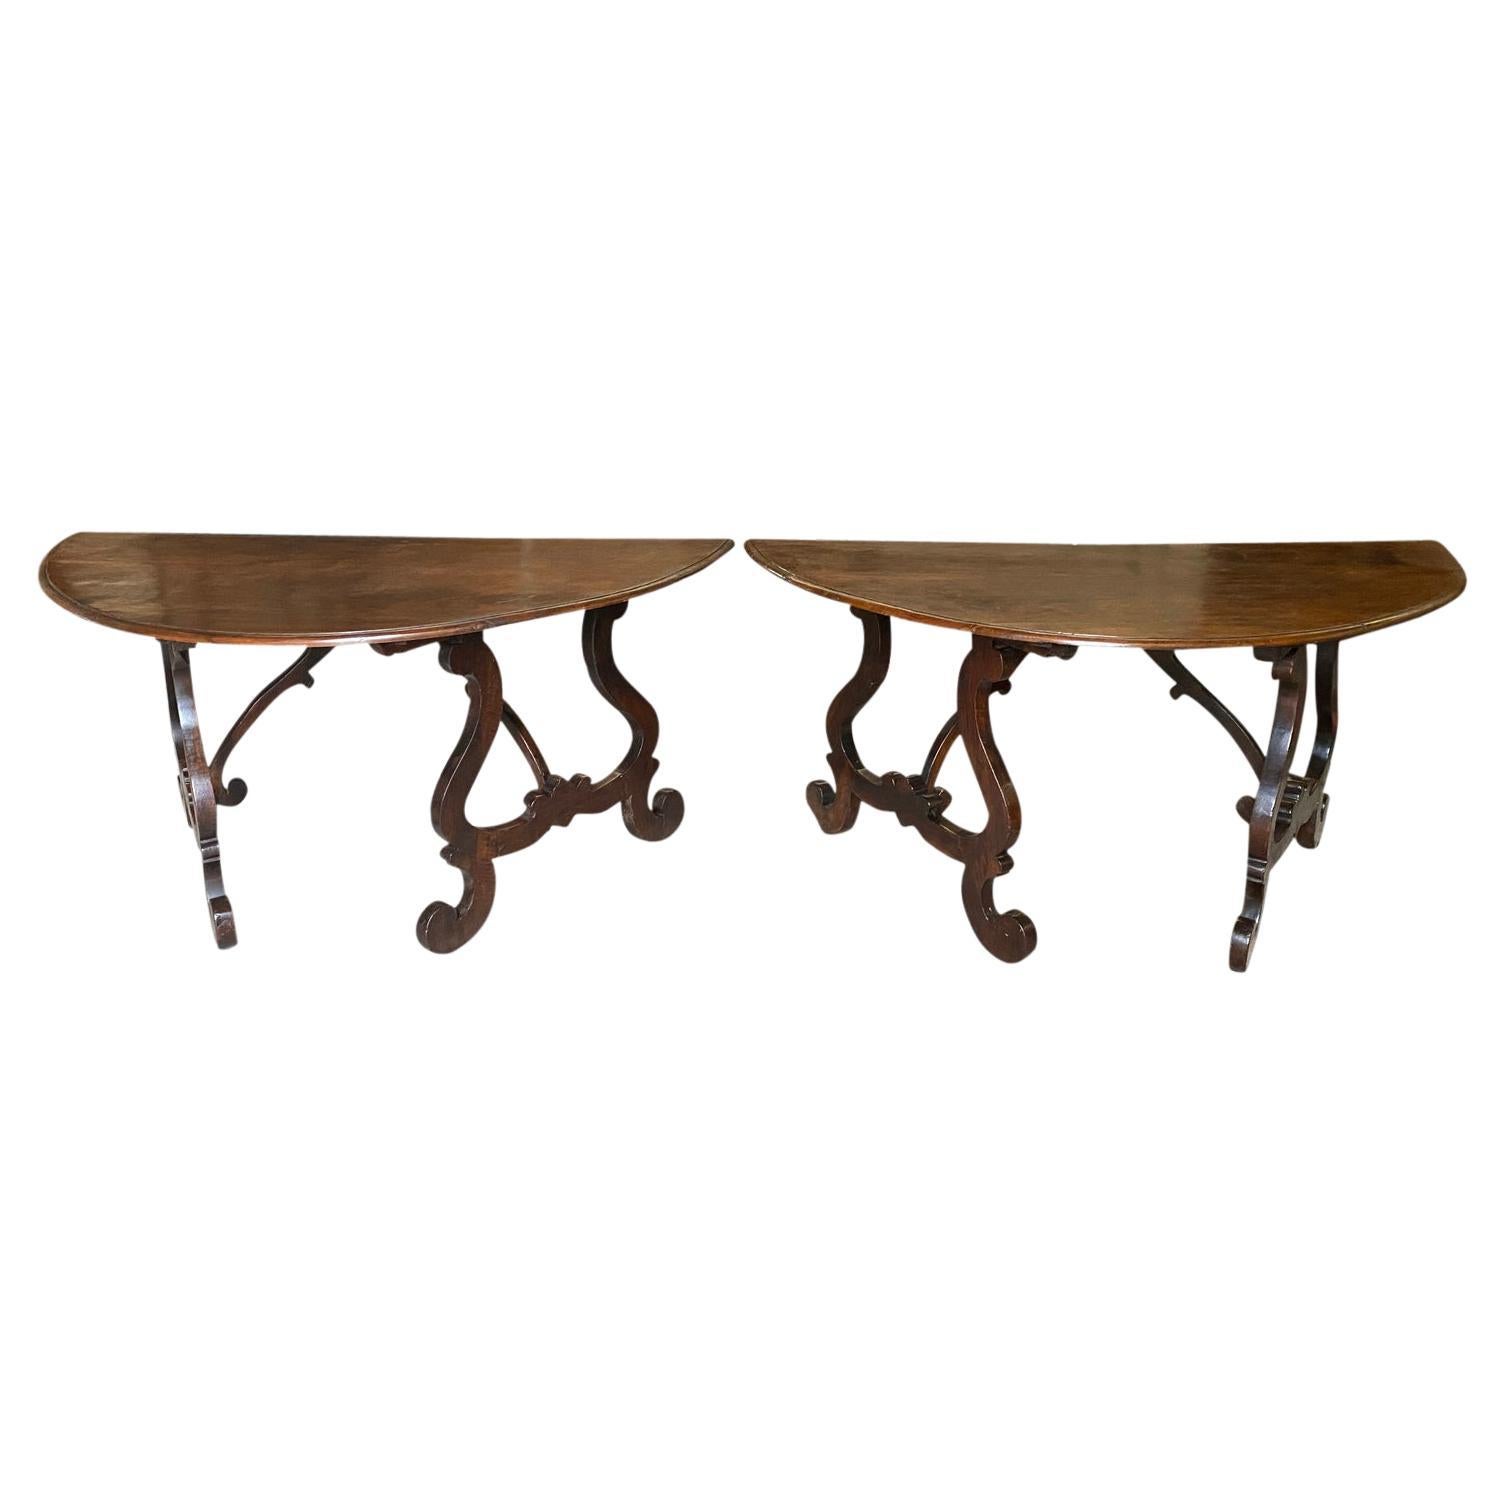 Exceptional Pair of Italian 18th Century Grand Scale Demi Lune Console Tables For Sale